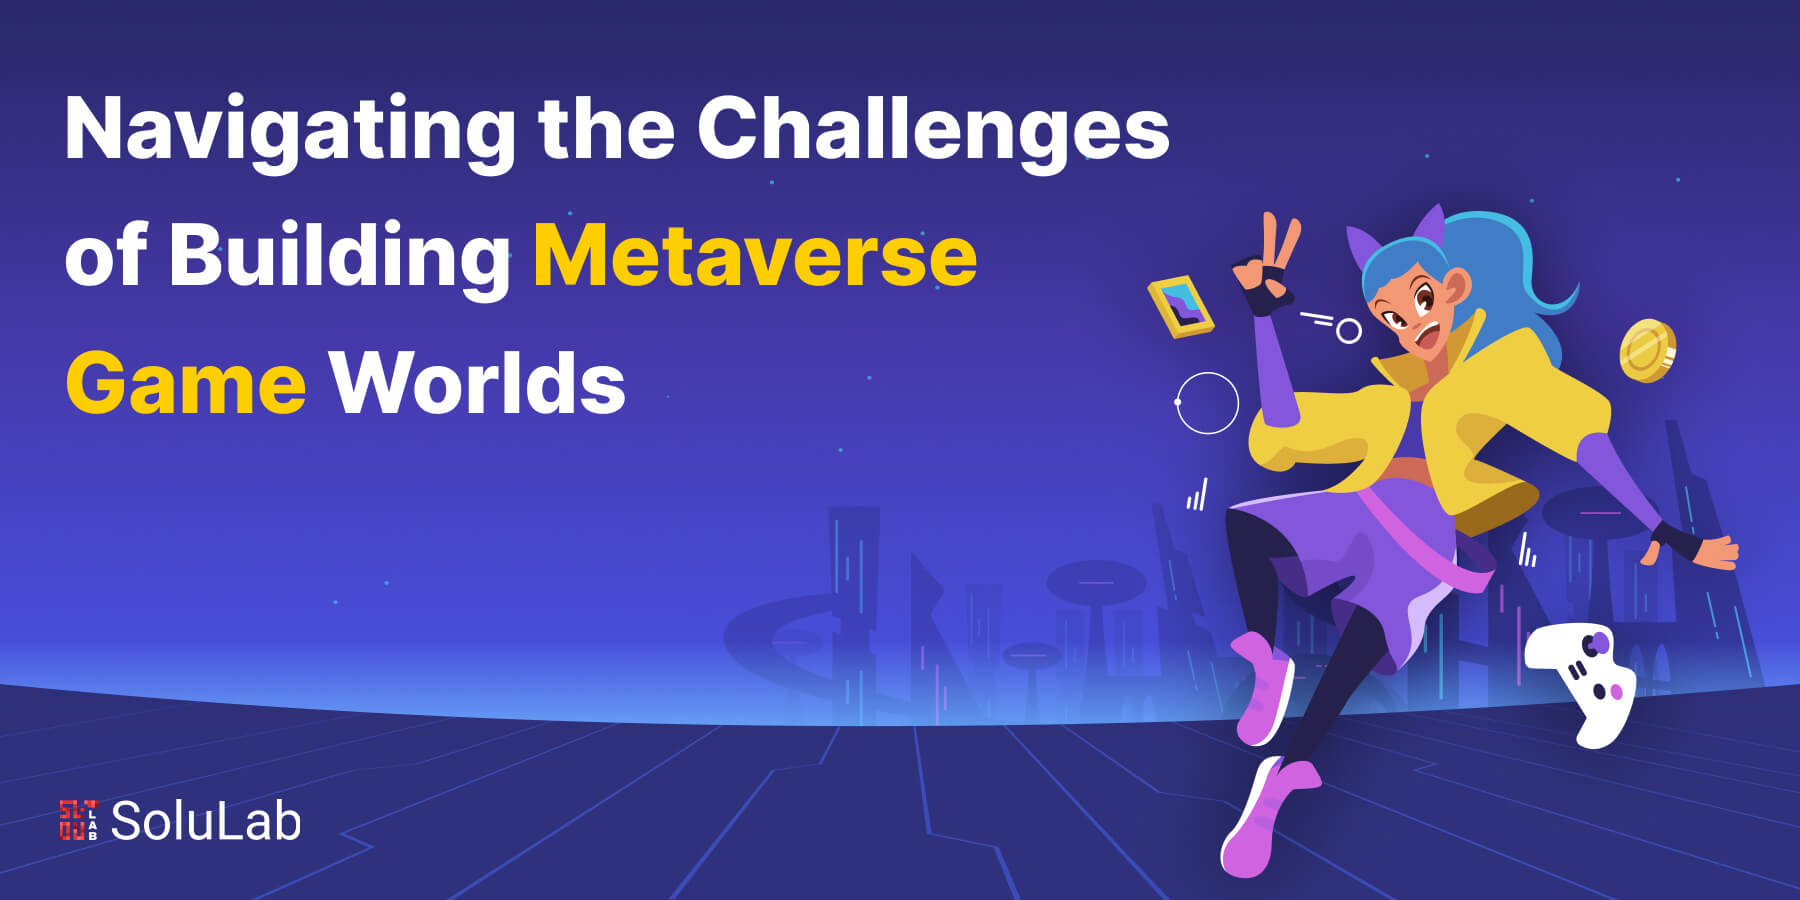 Navigating the Challenges of Building Metaverse Game Worlds